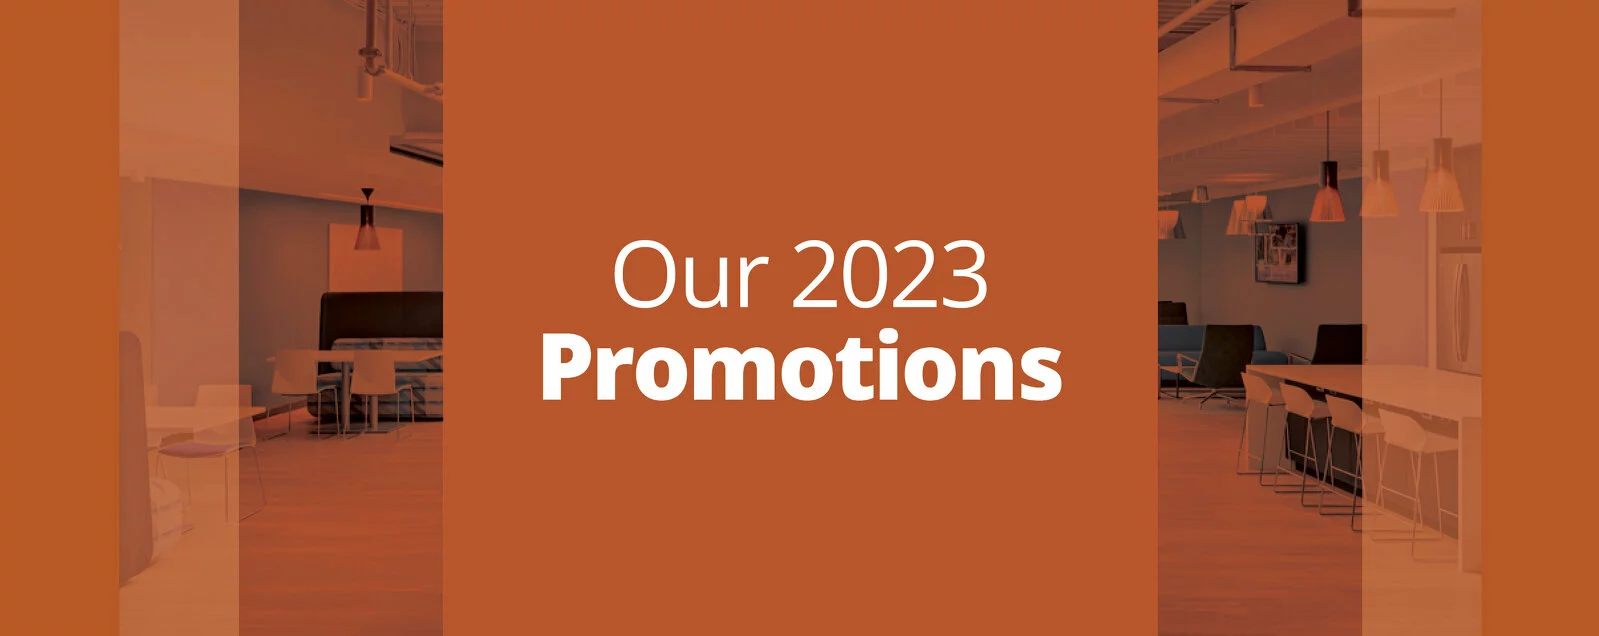 2023 Promotions